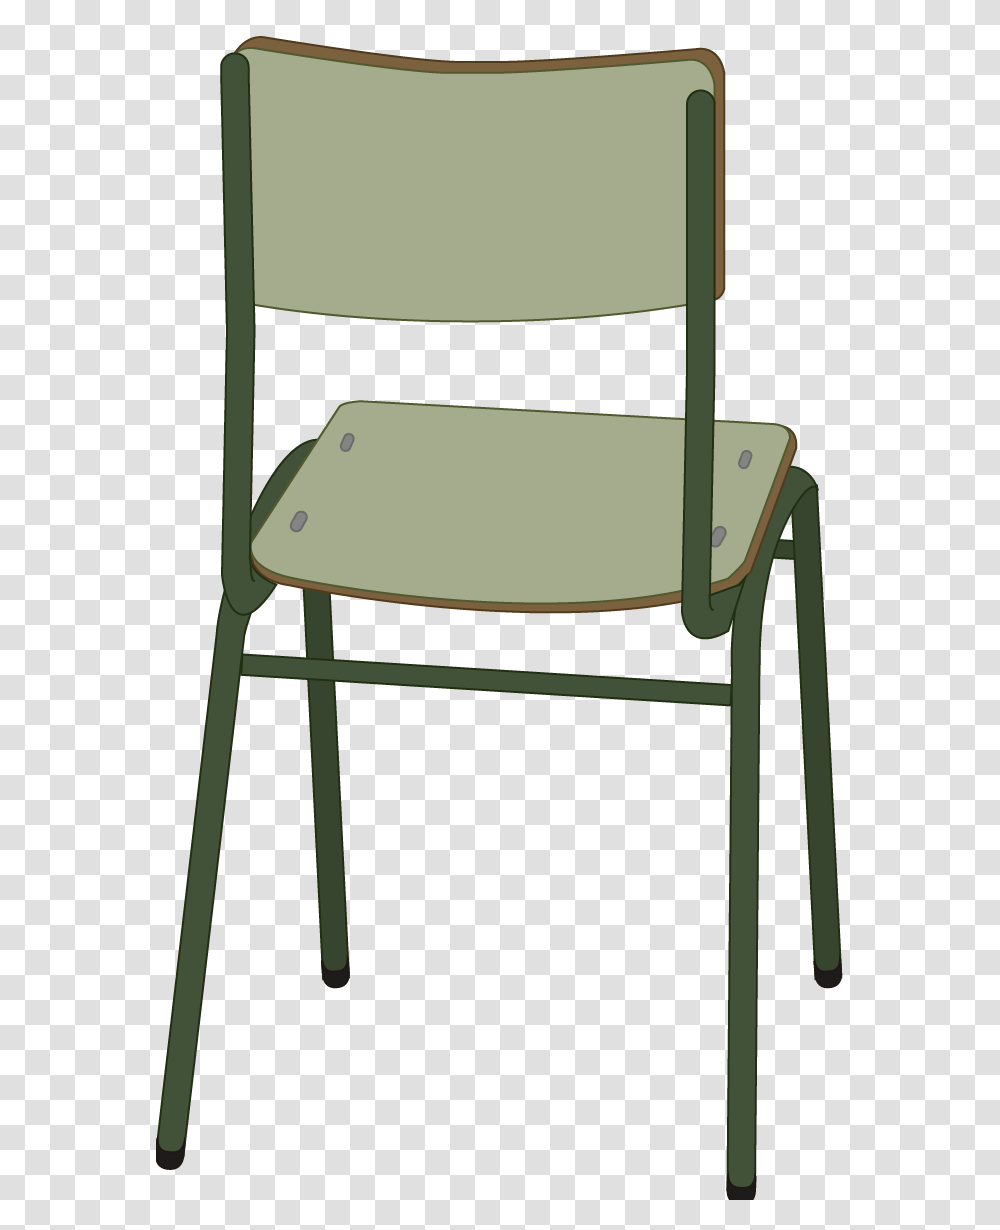 Chair, Furniture, Table, Stand, Shop Transparent Png